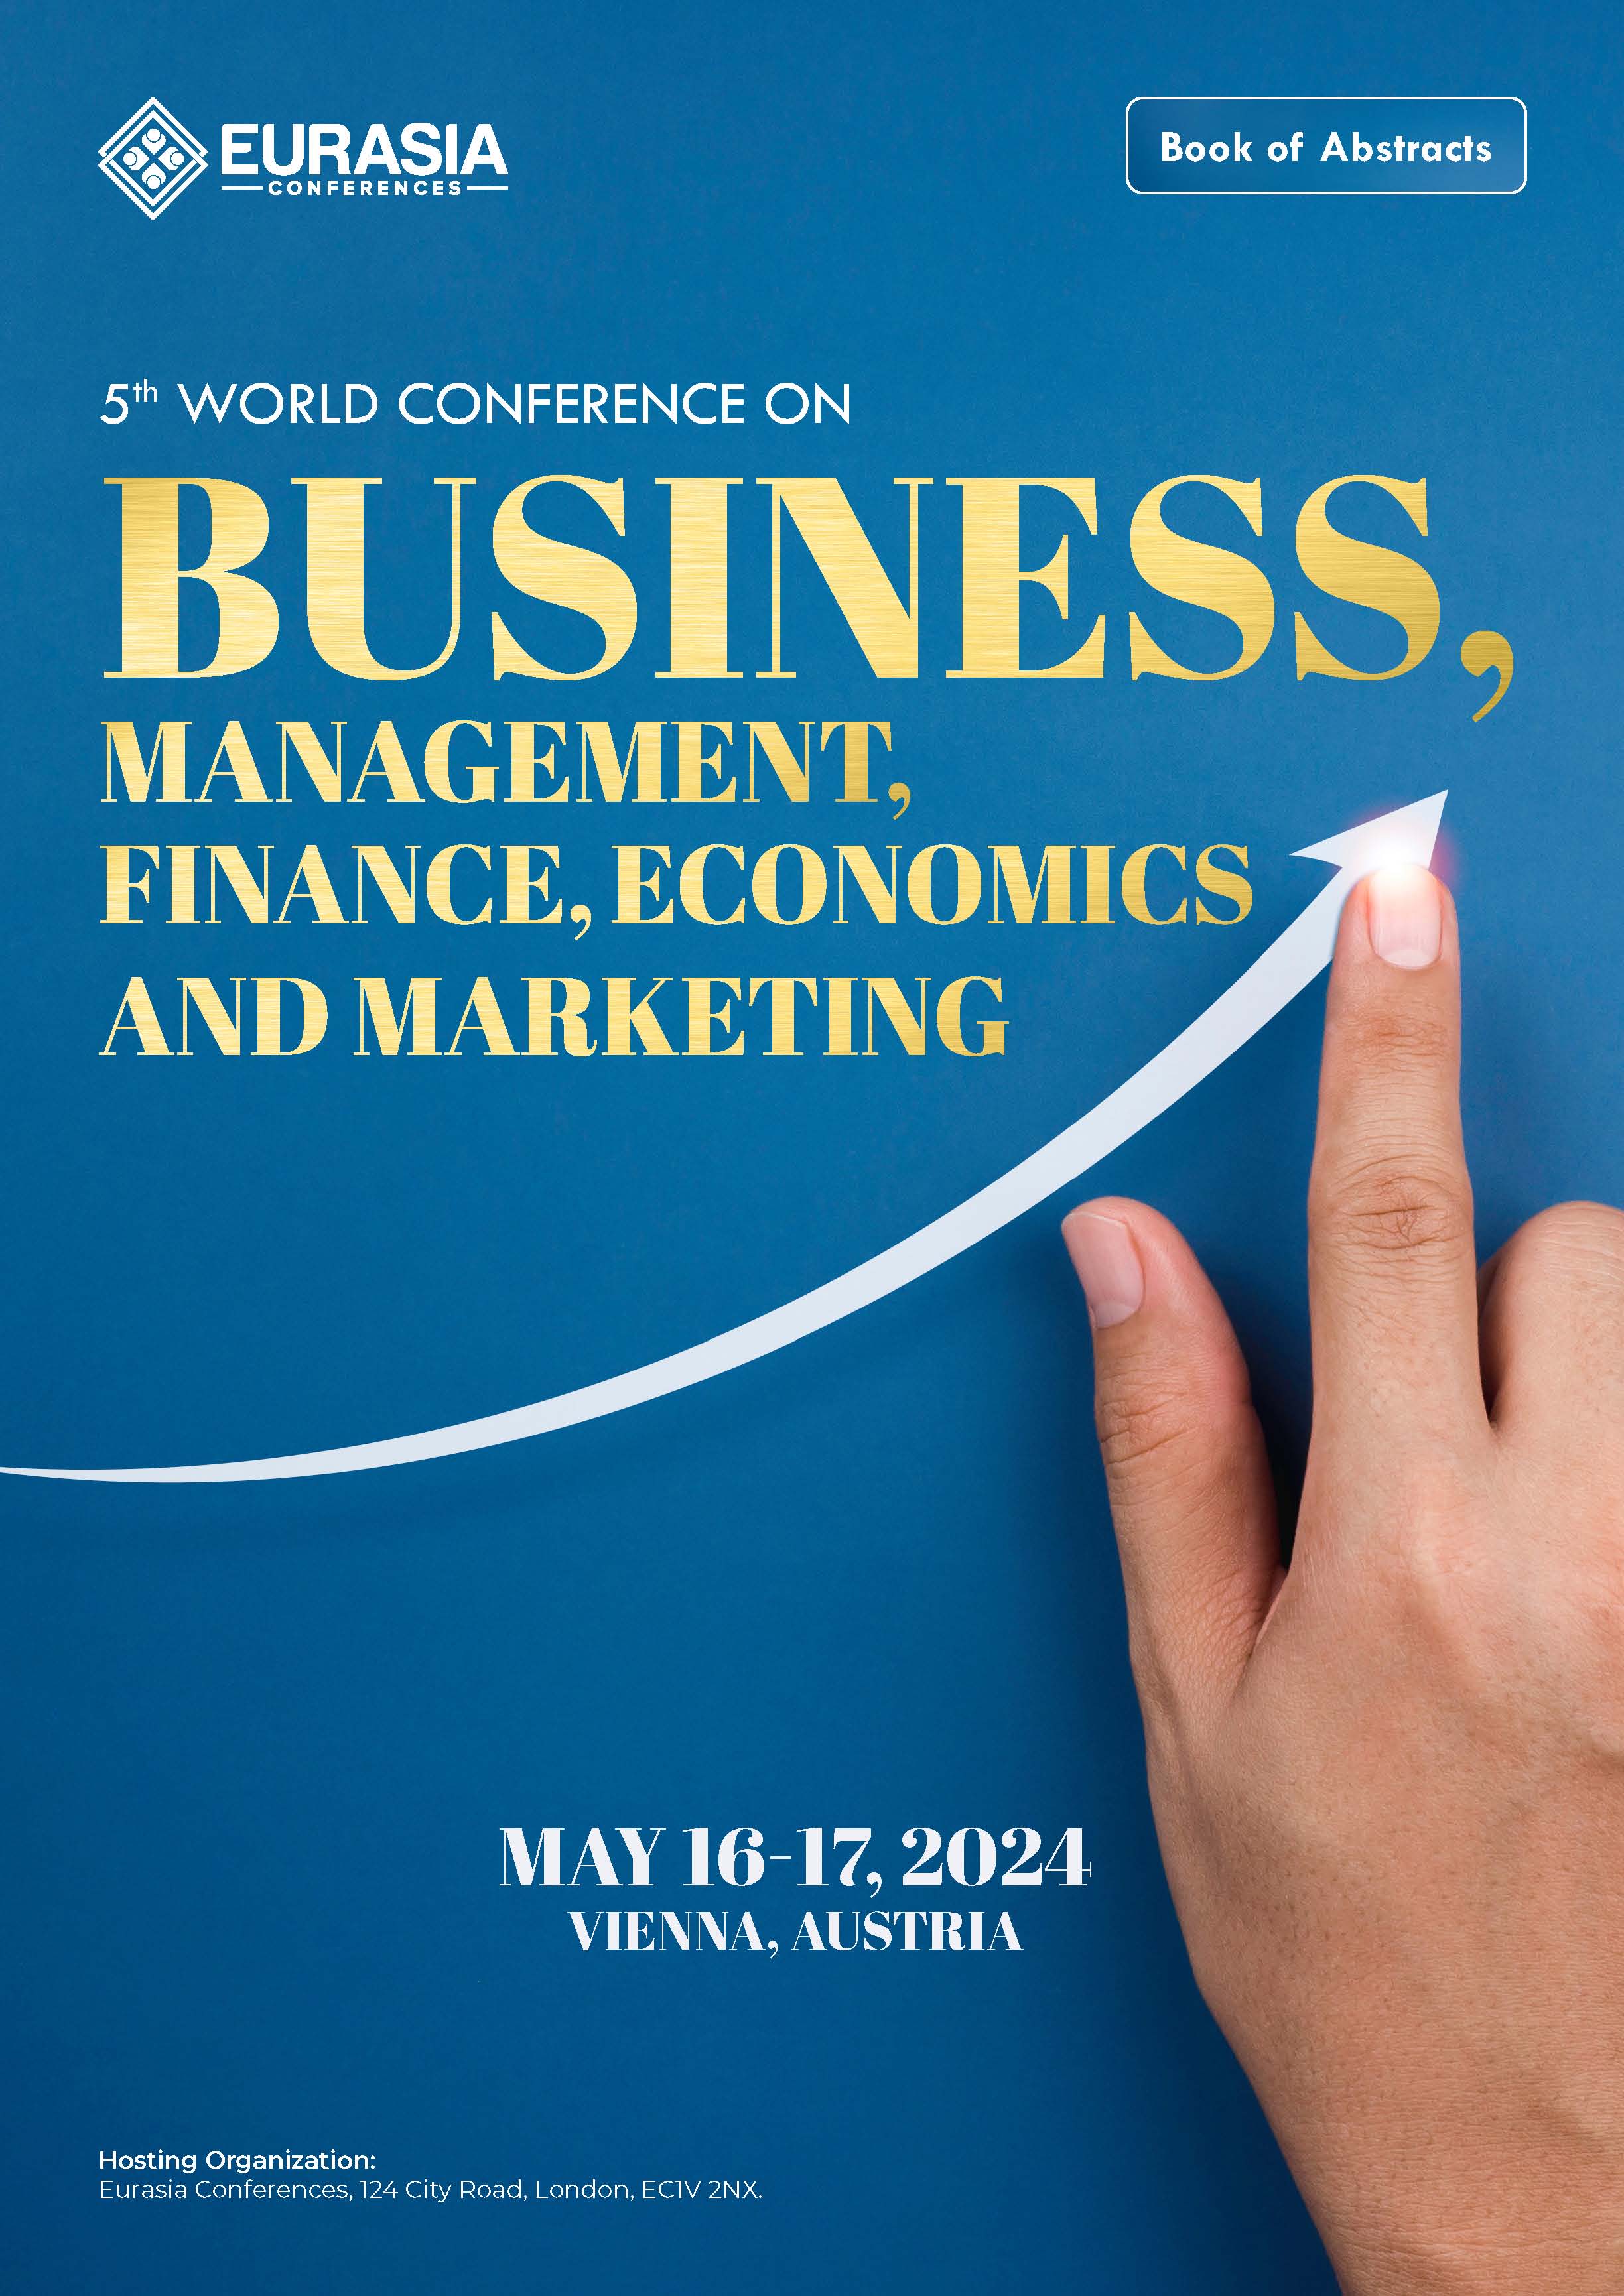 Abstracts of the 5th World Conference on Business, Management, Finance, Economics and Marketing